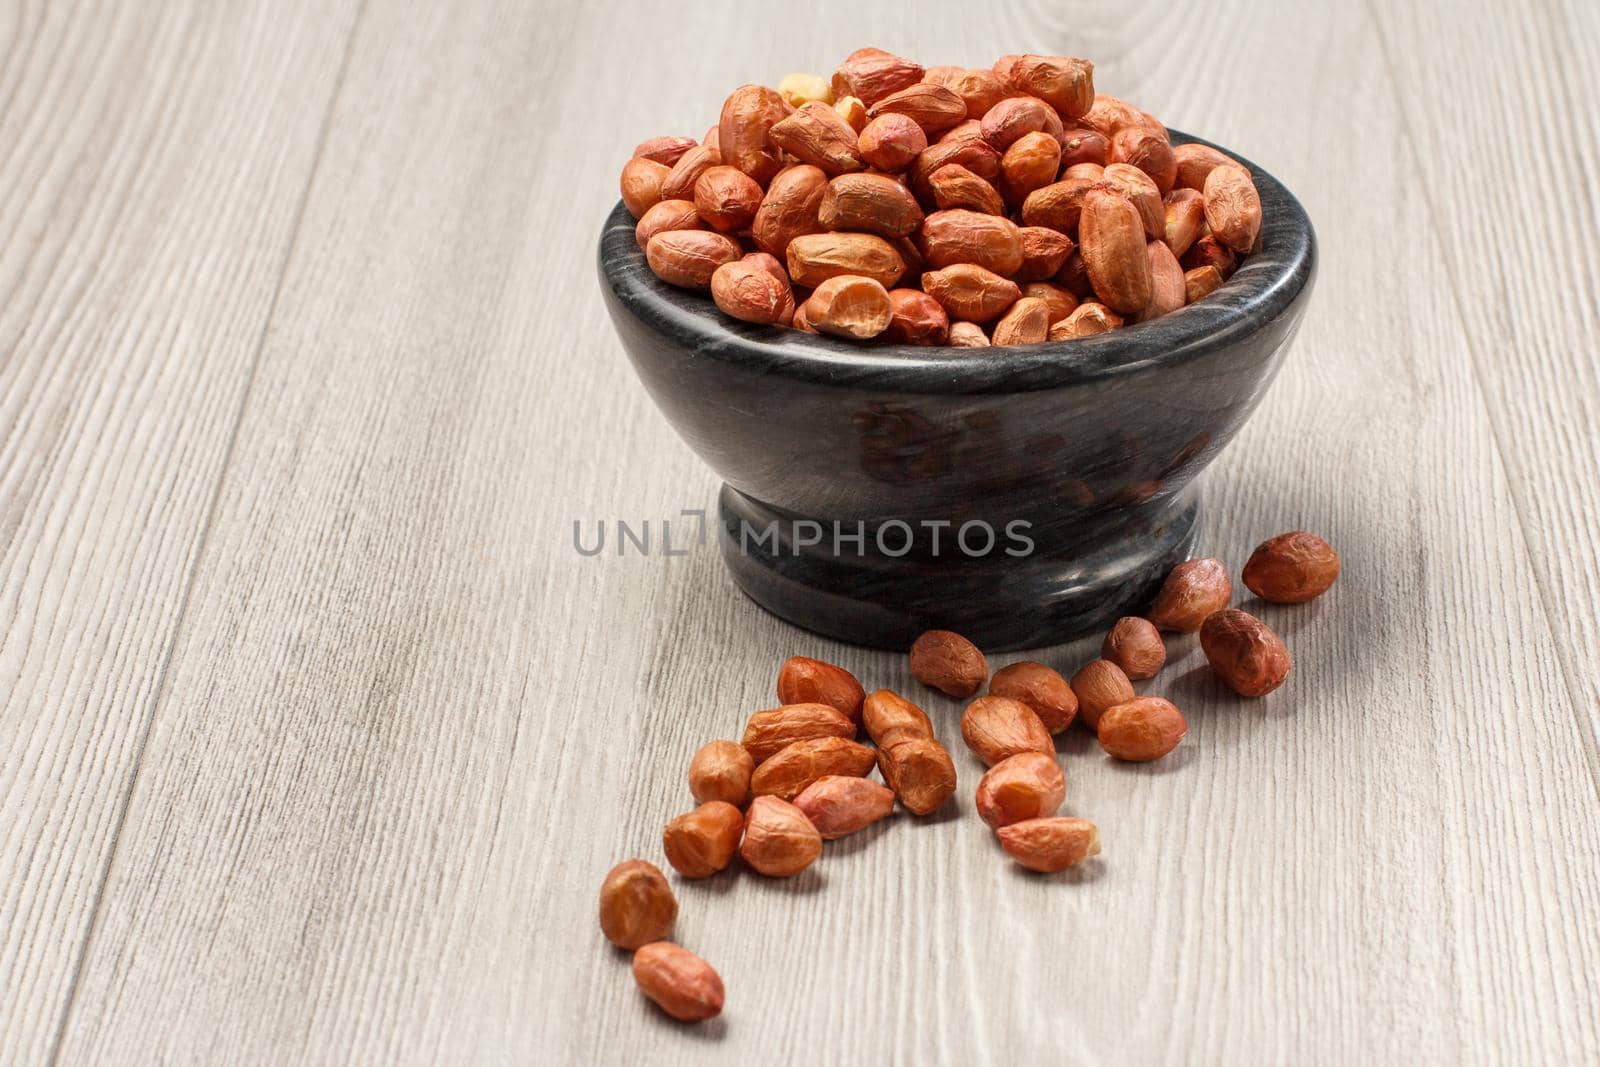 Peanuts in black porcelain bowl and beside it on grey wooden background